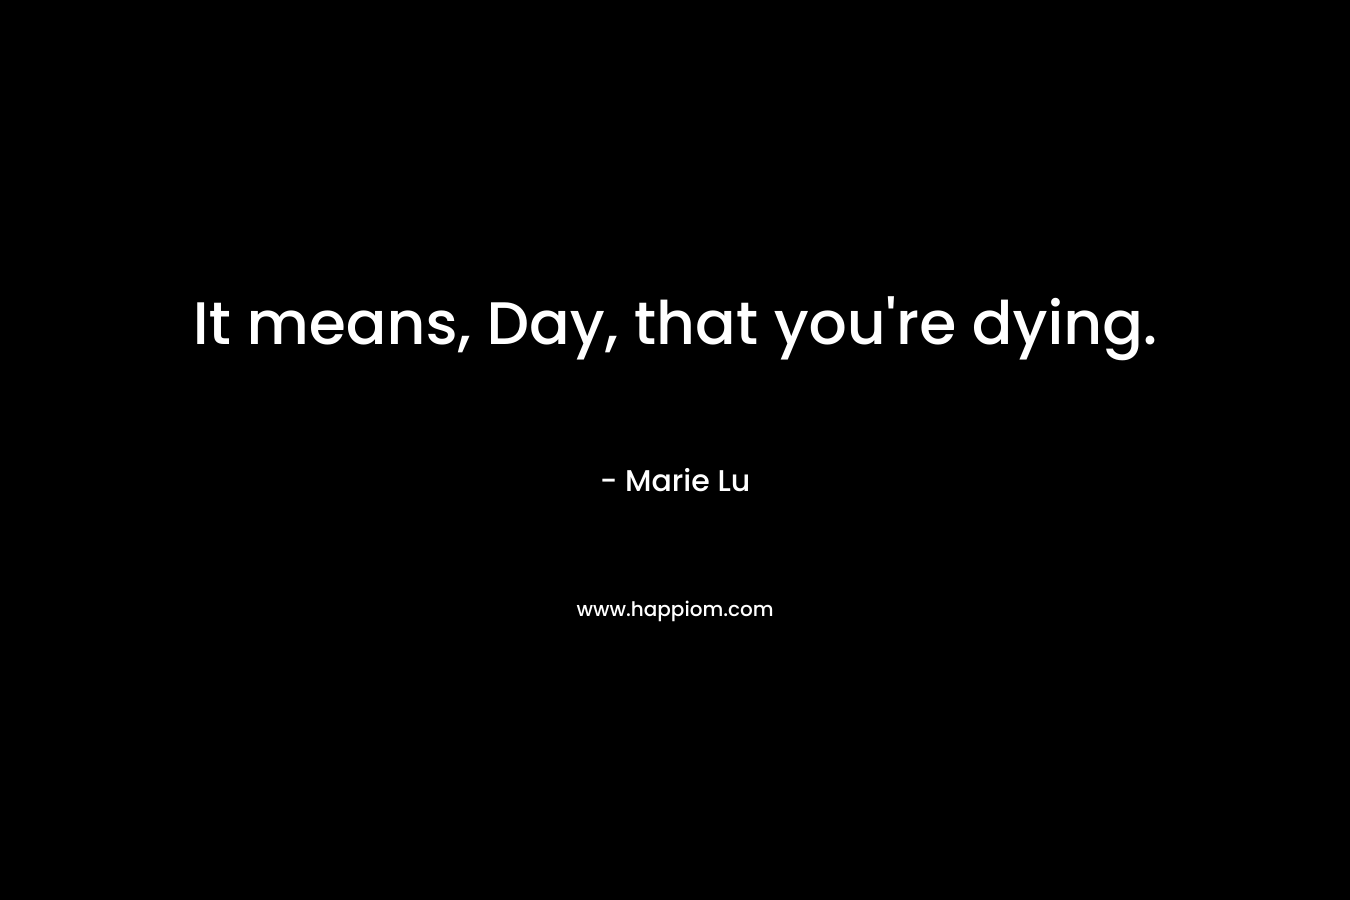 It means, Day, that you’re dying. – Marie Lu